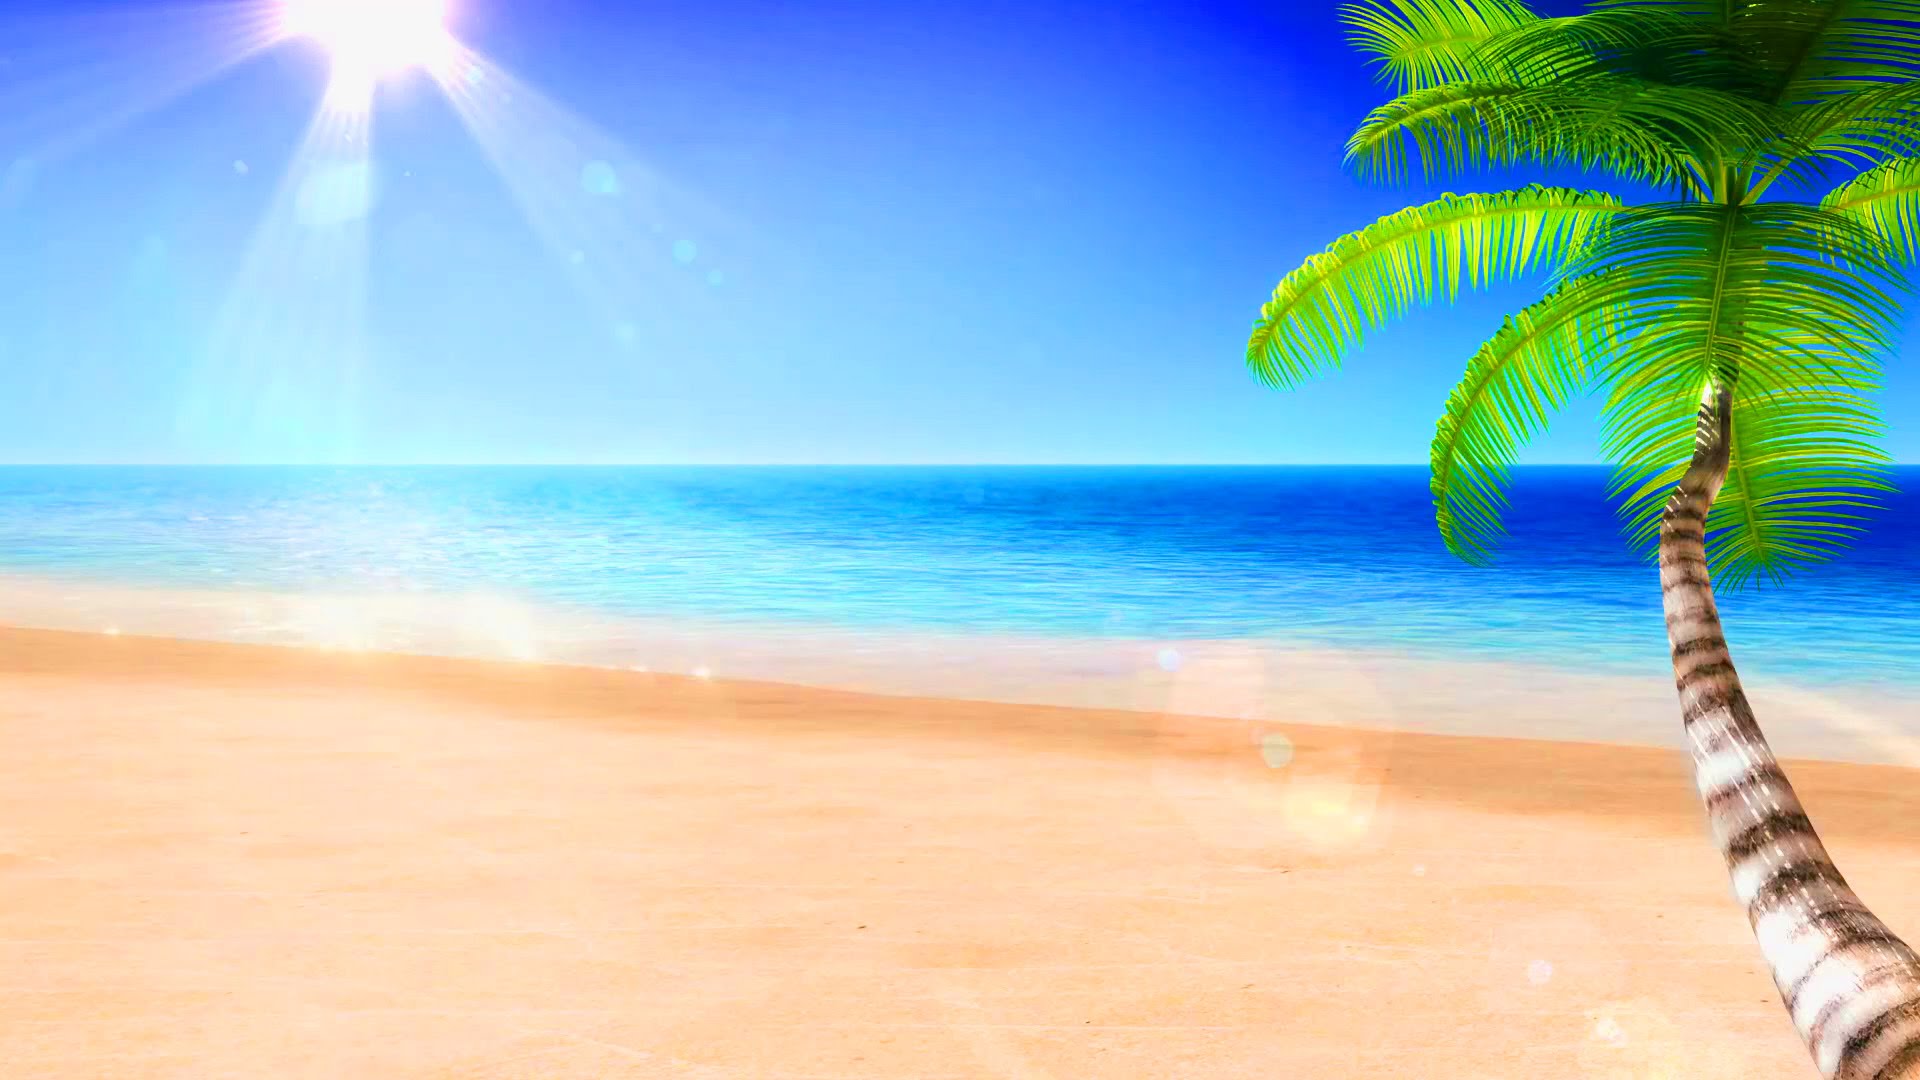 Free download Tropical Beach Wallpapers Pictures Images.